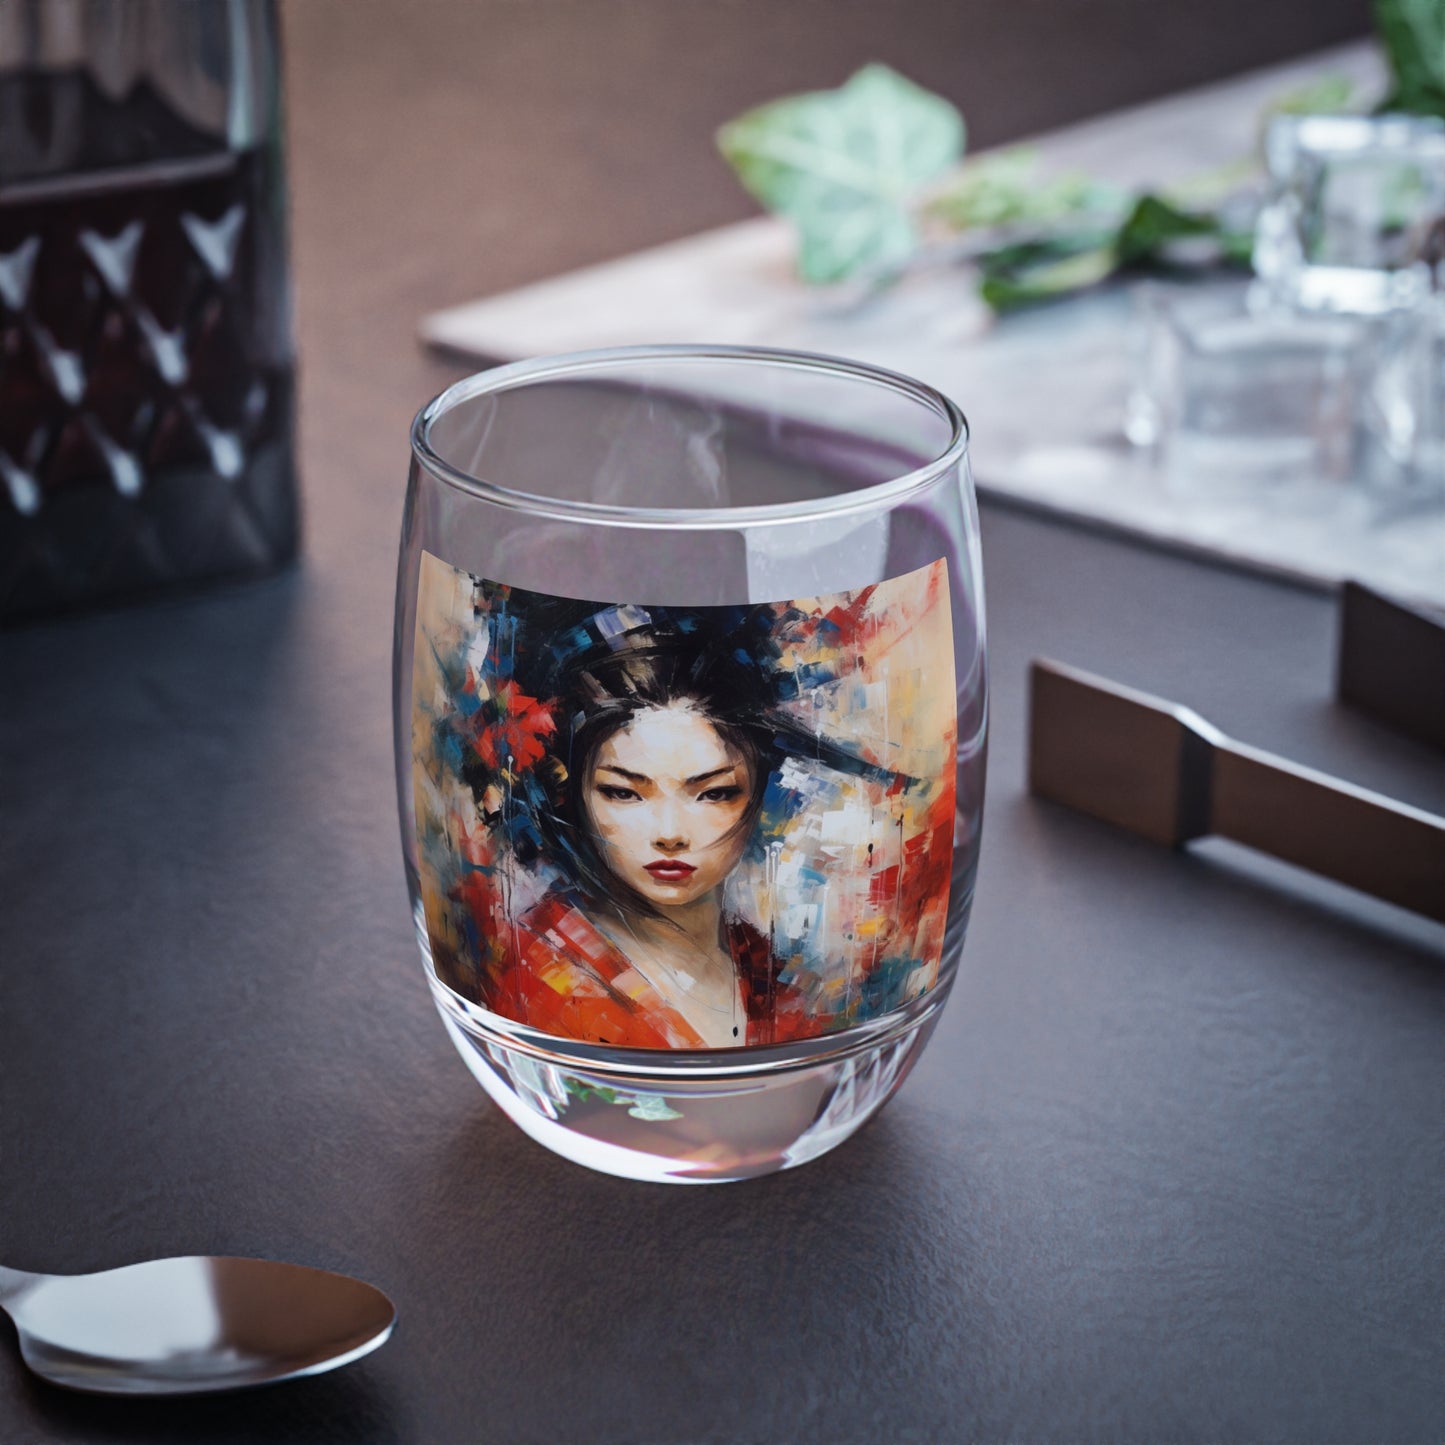 Abstract Geisha Art Whiskey Glass: Captivating Brushstrokes in a Japanese Aesthetic